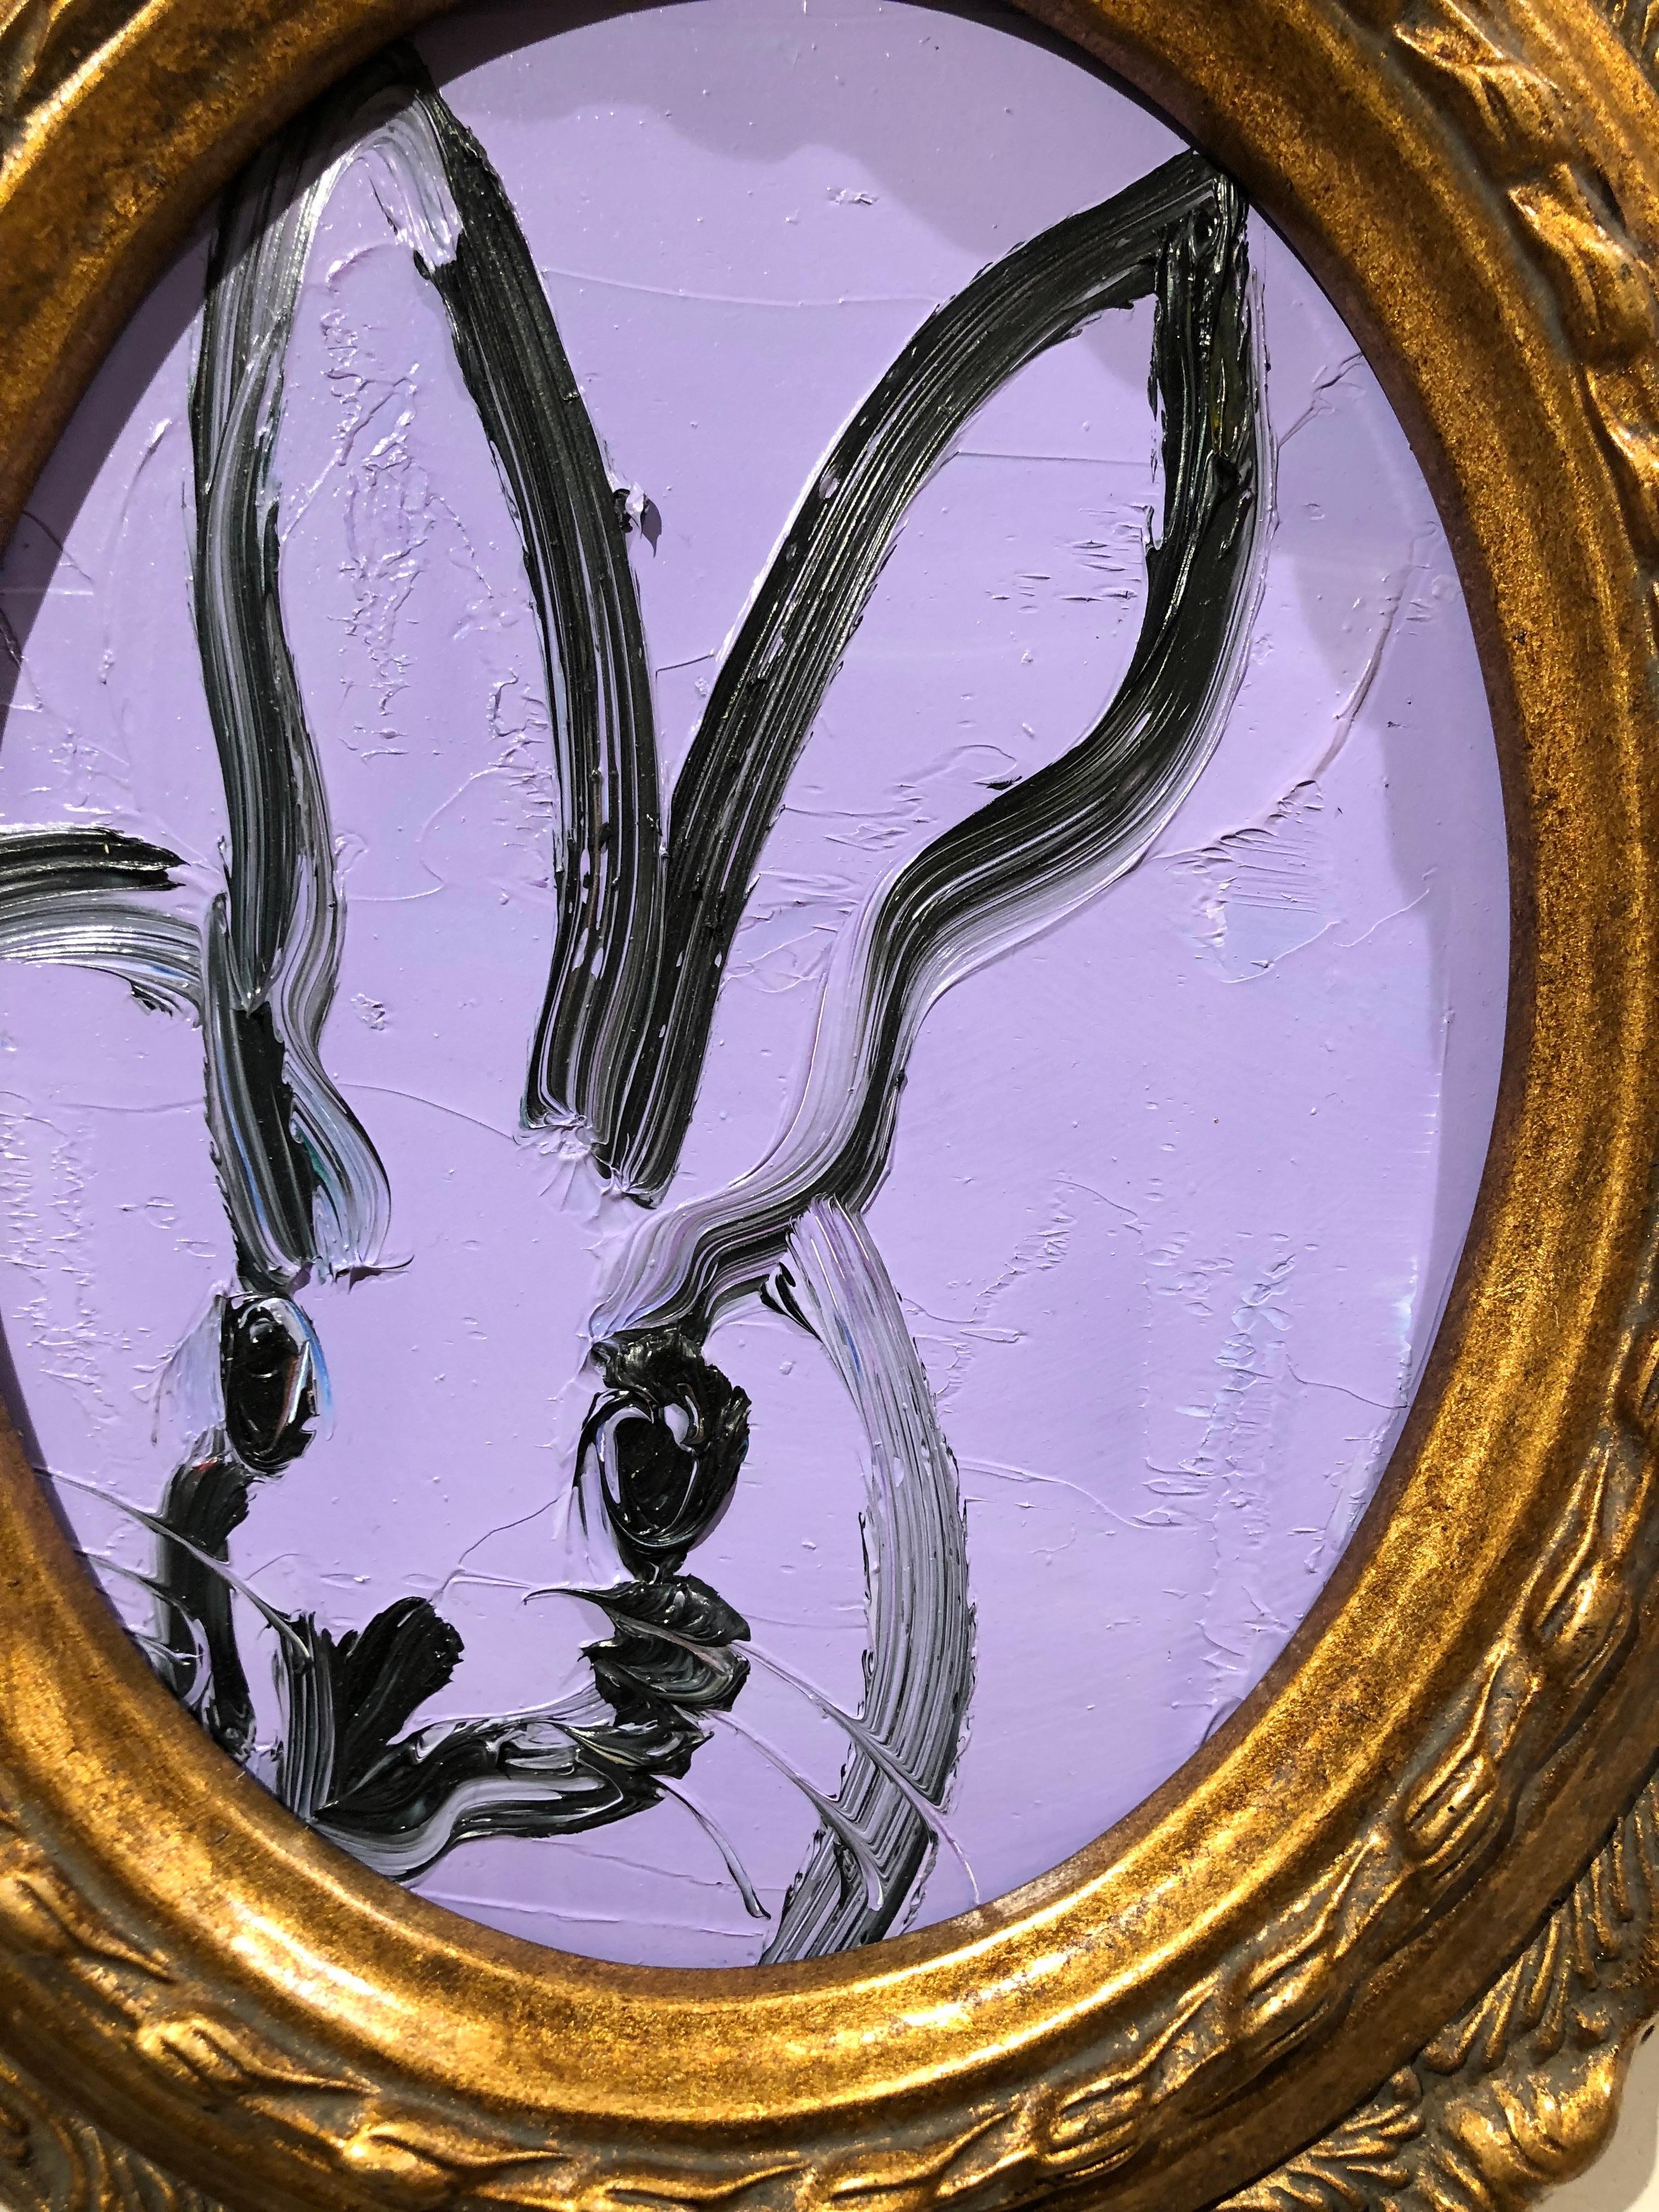 Untitled Oval Bunny  - Neo-Expressionist Painting by Hunt Slonem